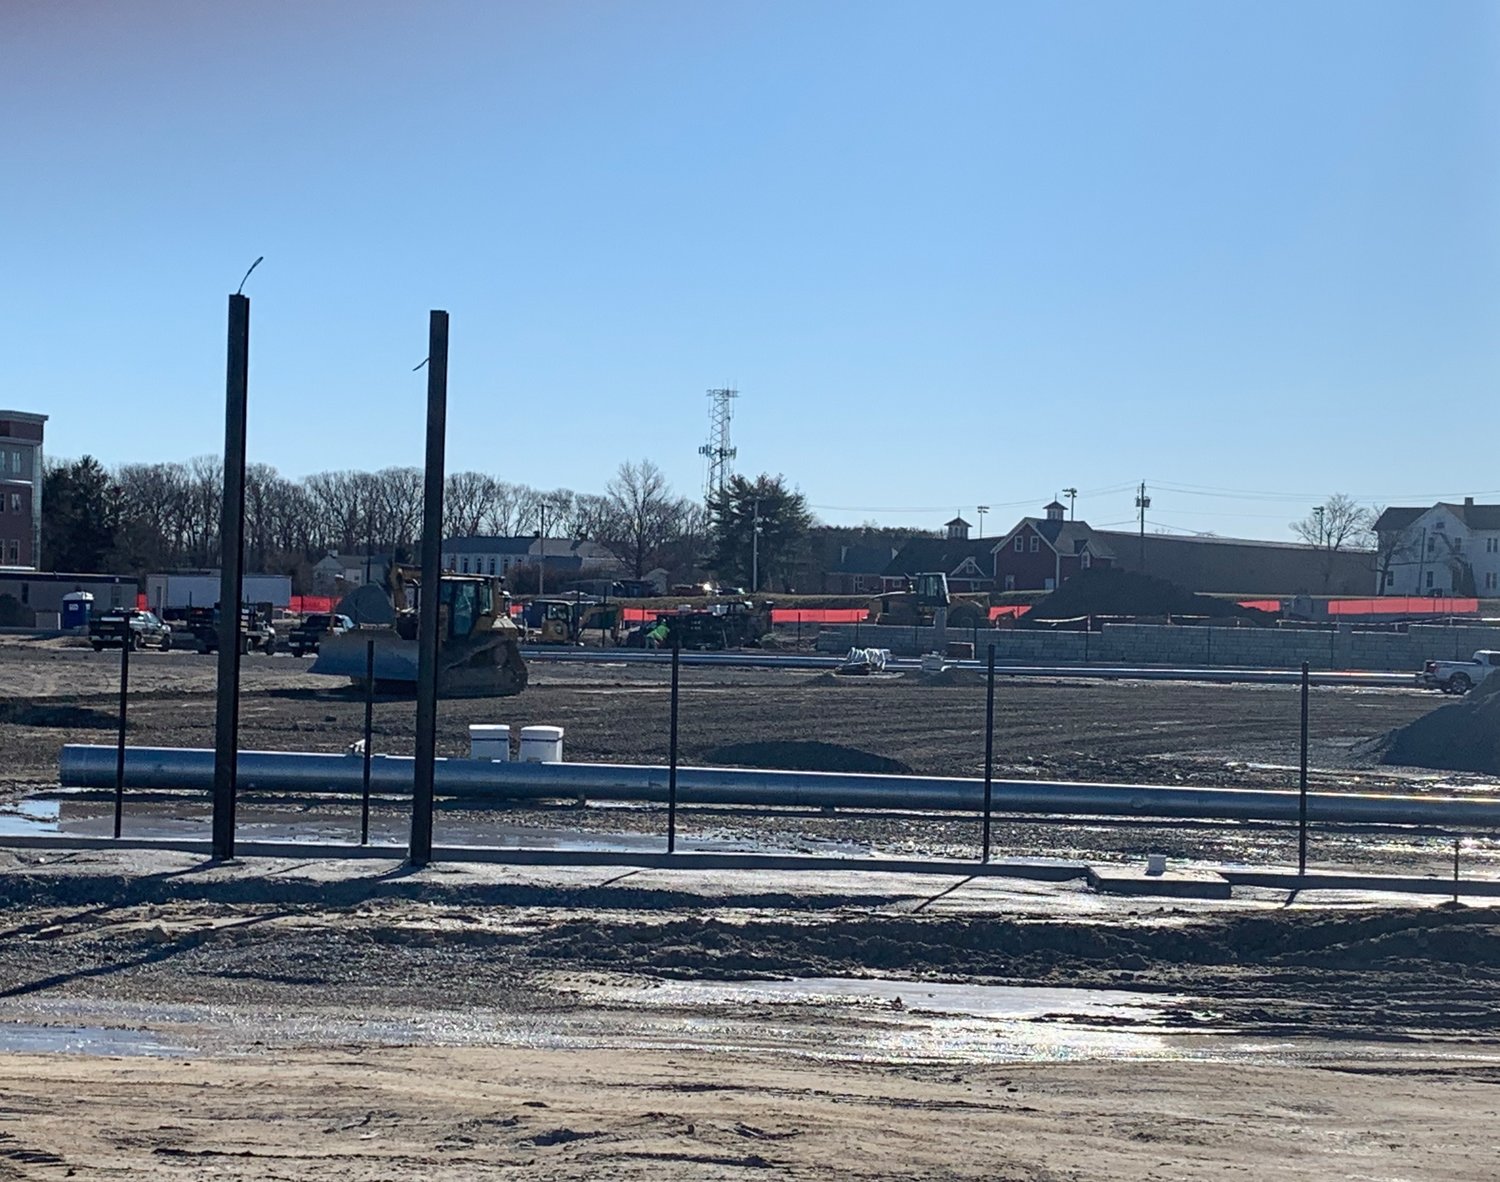 Construction crews grade the baseball field in front of the new East Providence High School on Tuesday, Jan. 4, while a light pole and the scoreboard frame await installation.